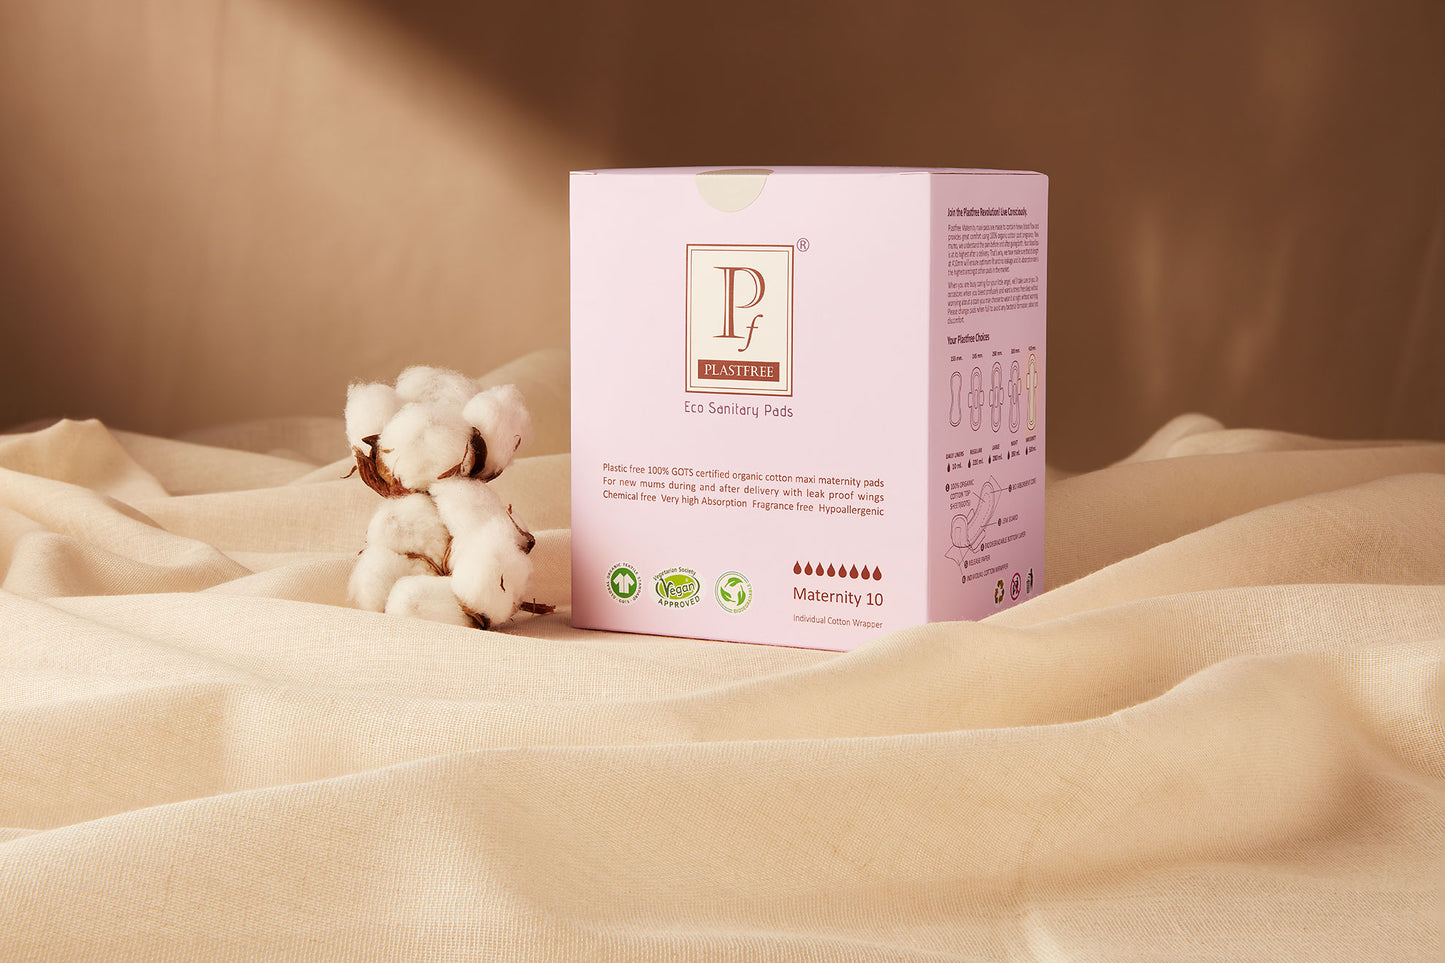 PLASTFREE 100% Organic Cotton MATERNITY Multipack OFFER (Pack of 12-120 Pads) save upto £7